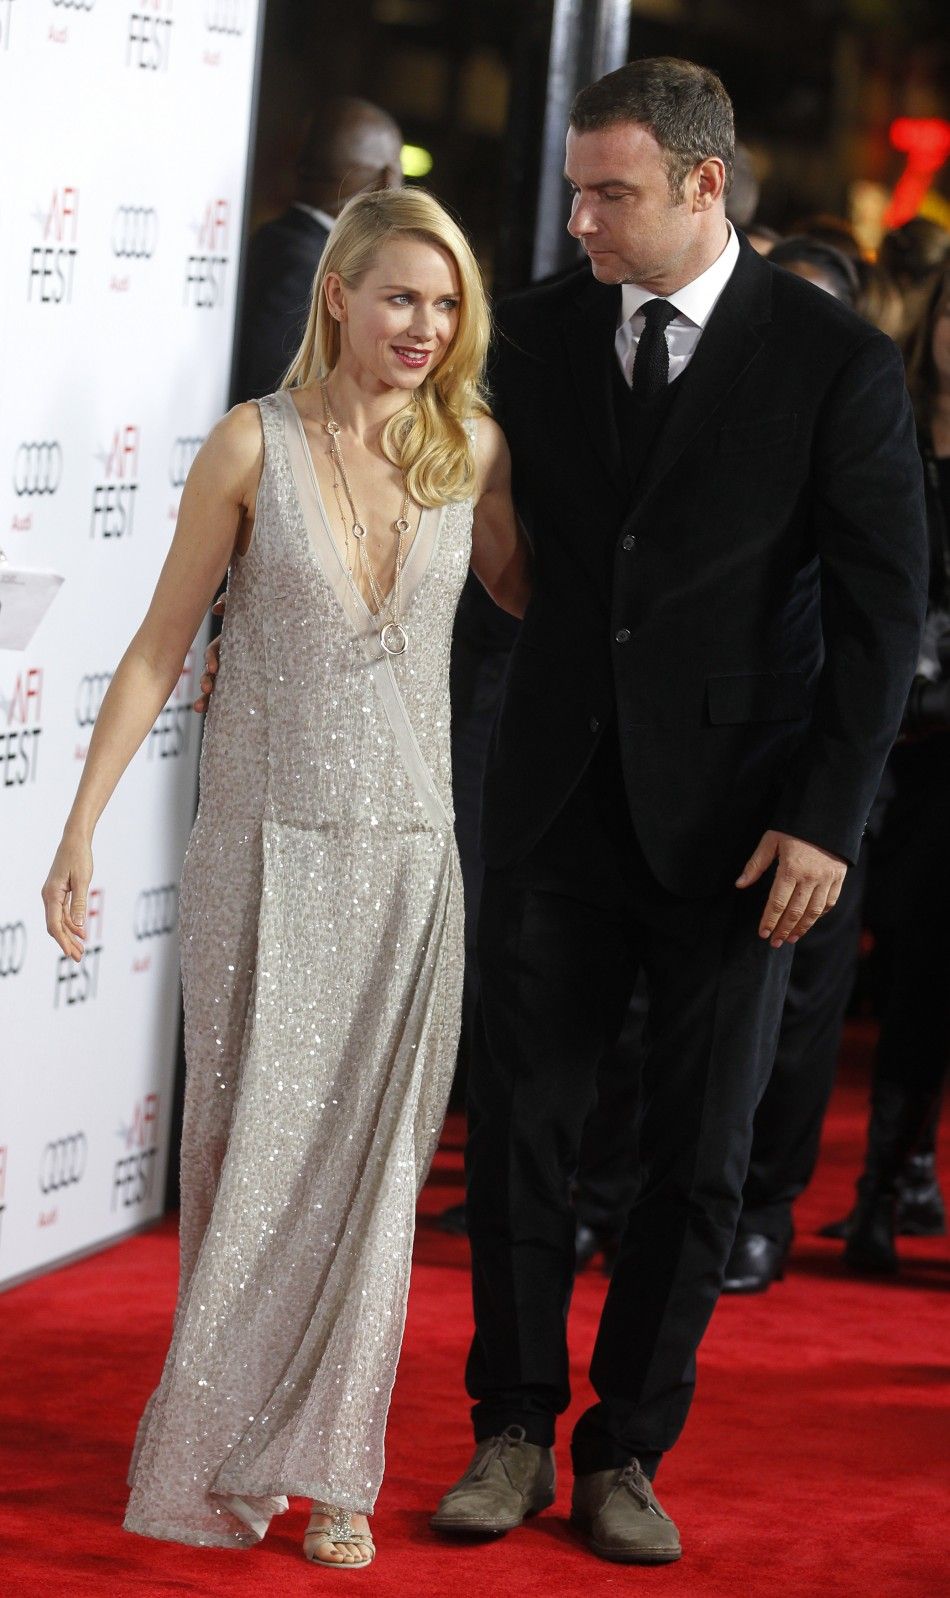 Actress Naomi Watts poses with boyfriend actor Liev Schreiber at the opening night gala for AFI Fest 2011 with the premiere of her new film film quotJ. Edgarquot directed by Clint Eastwood in Hollywood 